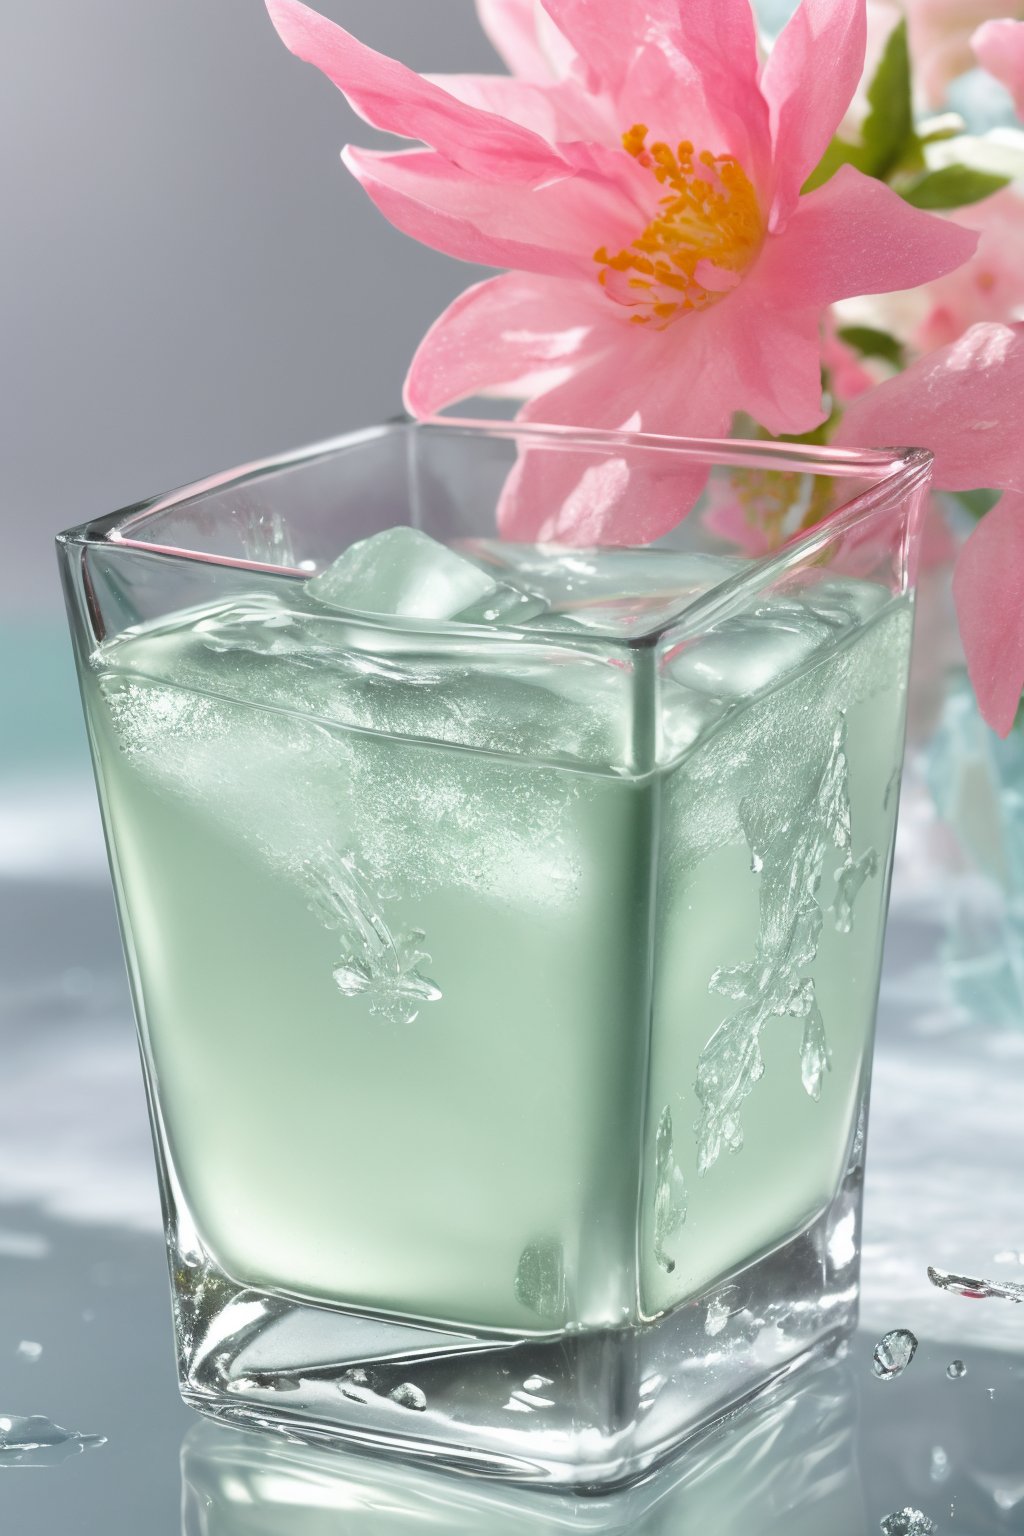 a young girl in vibrant attire stands amidst a backdrop of shimmering glass, where transparent ice cubes adorned with jasmine flowers slowly melt into a clear green tea. Water splashes radiate outward as the cubes dissolve, surrounded by a refreshing cool atmosphere. The close-up shot focuses on the icy cubes, their intricate details and delicate petals glistening in the soft light.
3 point perspective composition,
(Emma Watson:0.8),